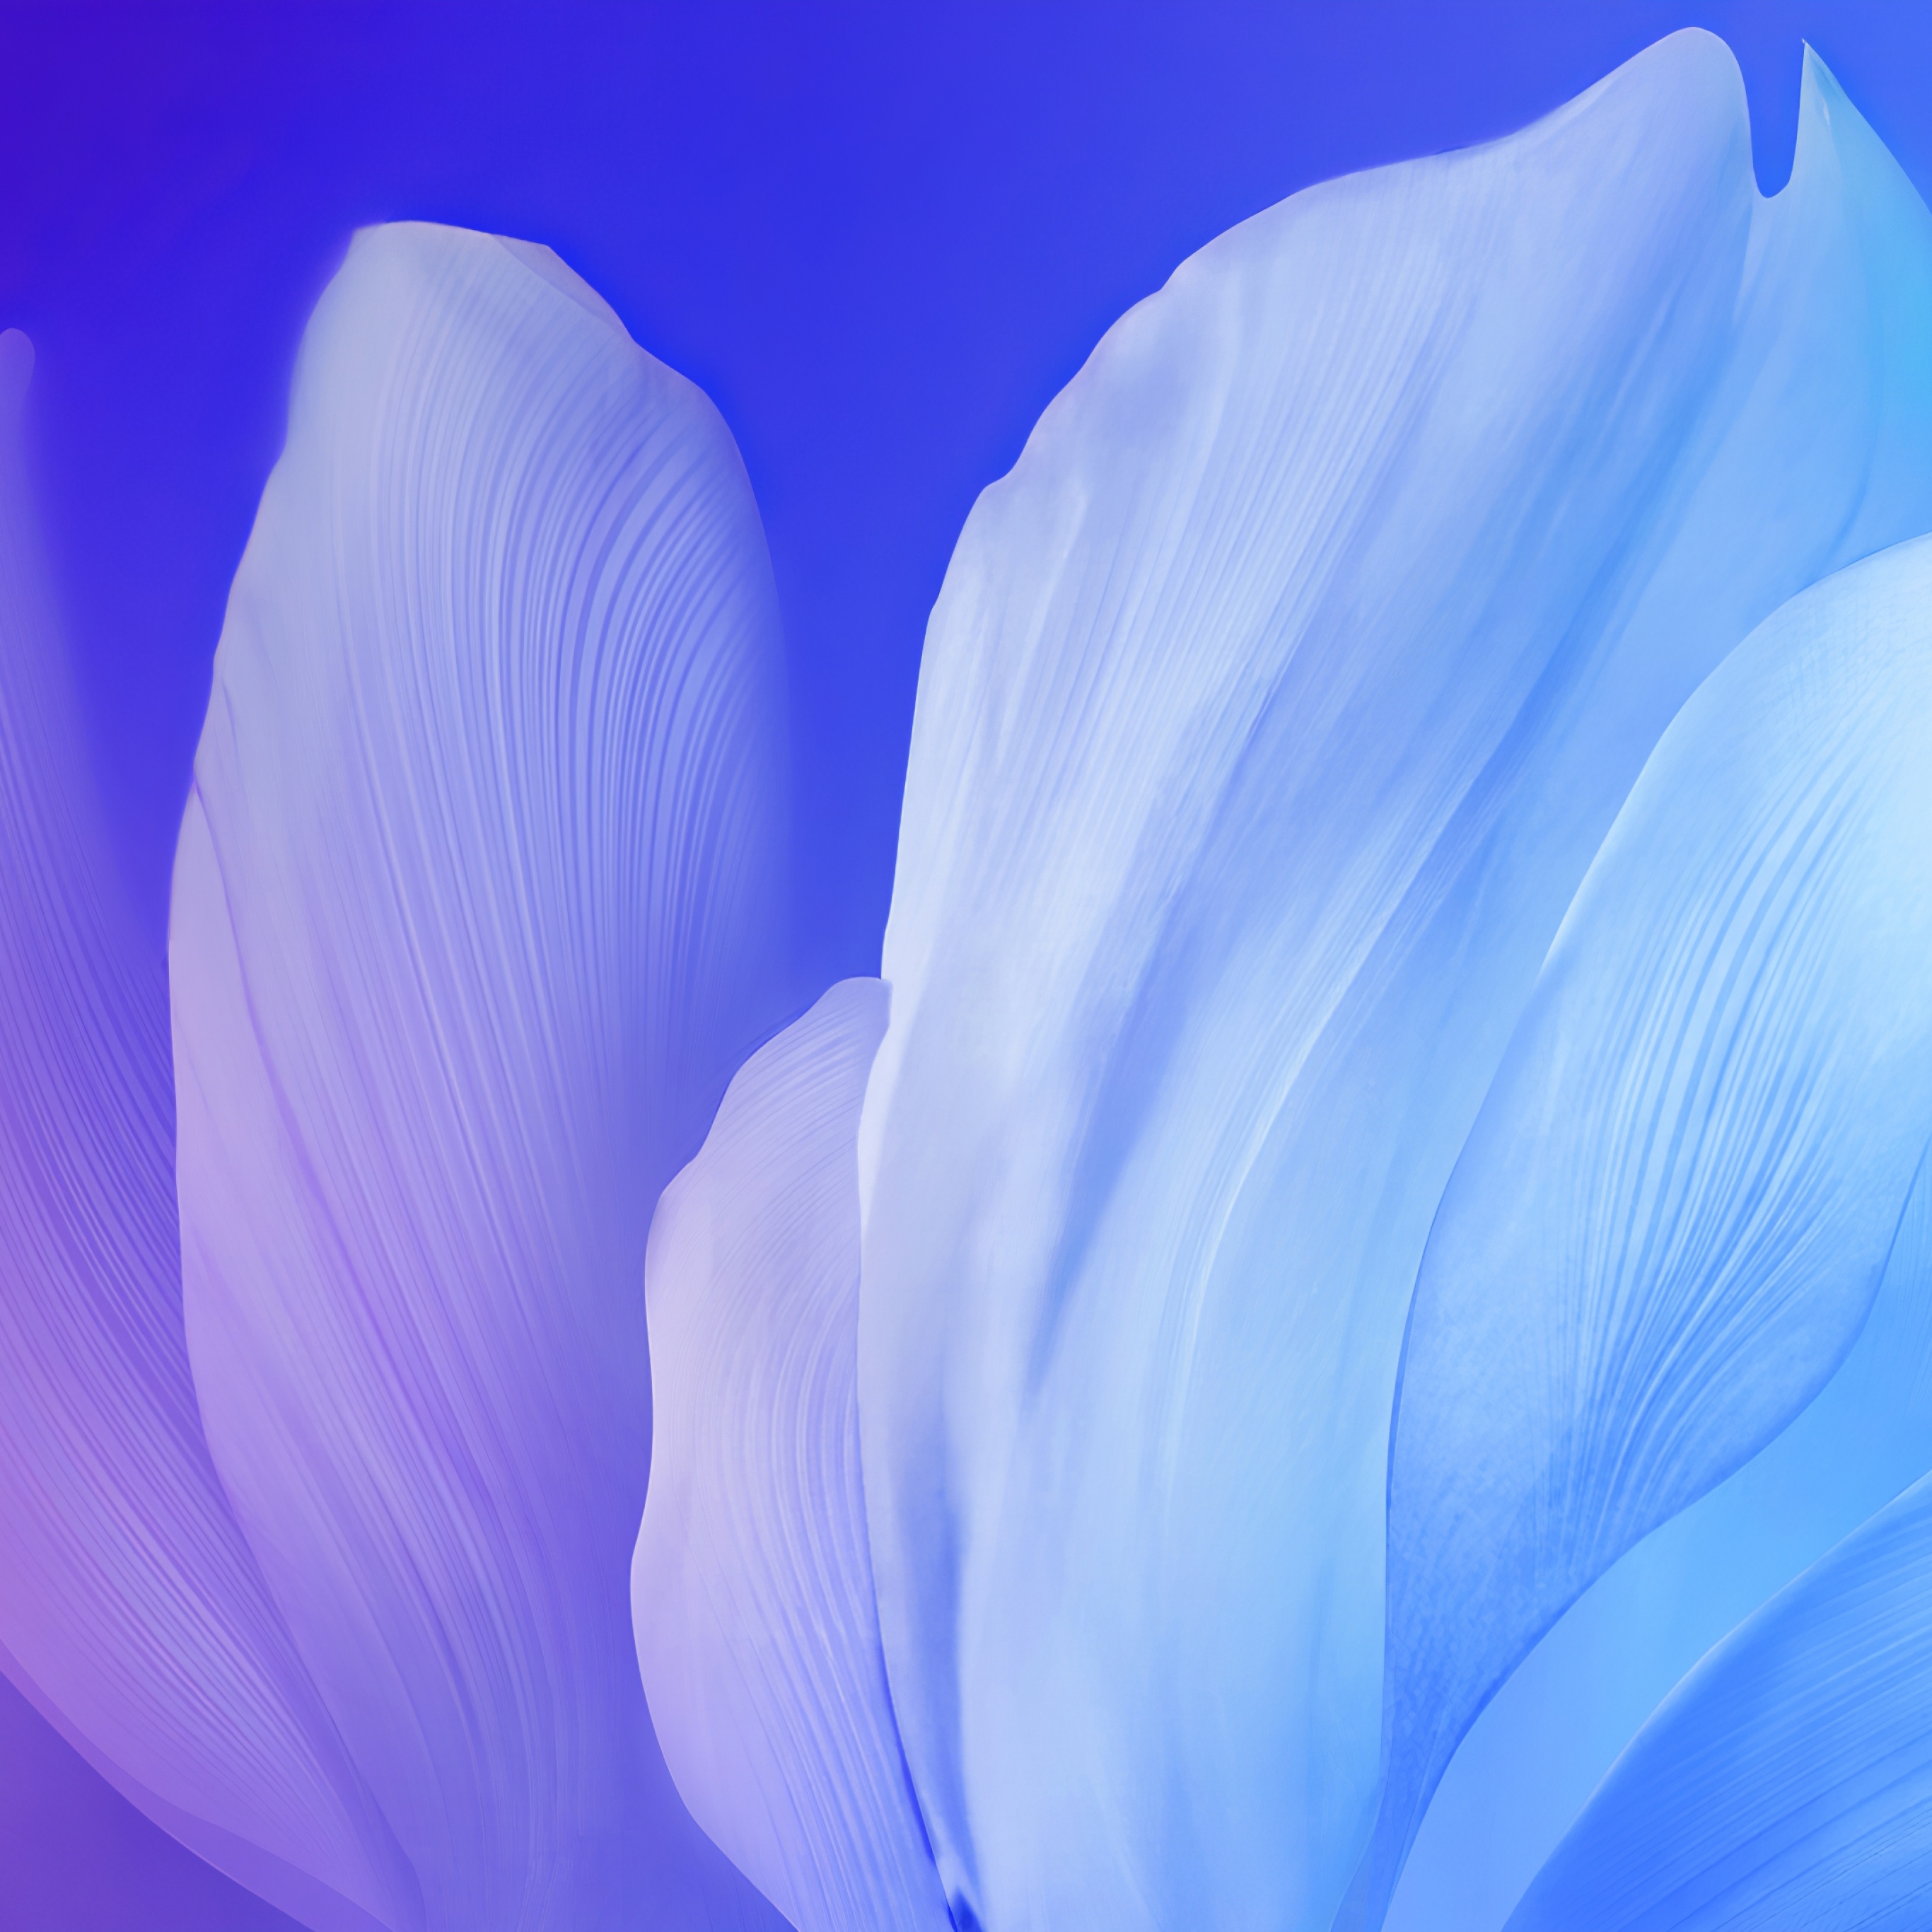 What is the title of this picture ? Blue flower Wallpaper 4K, Gradient, Vivo Stock, Android 10, Flowers, #494